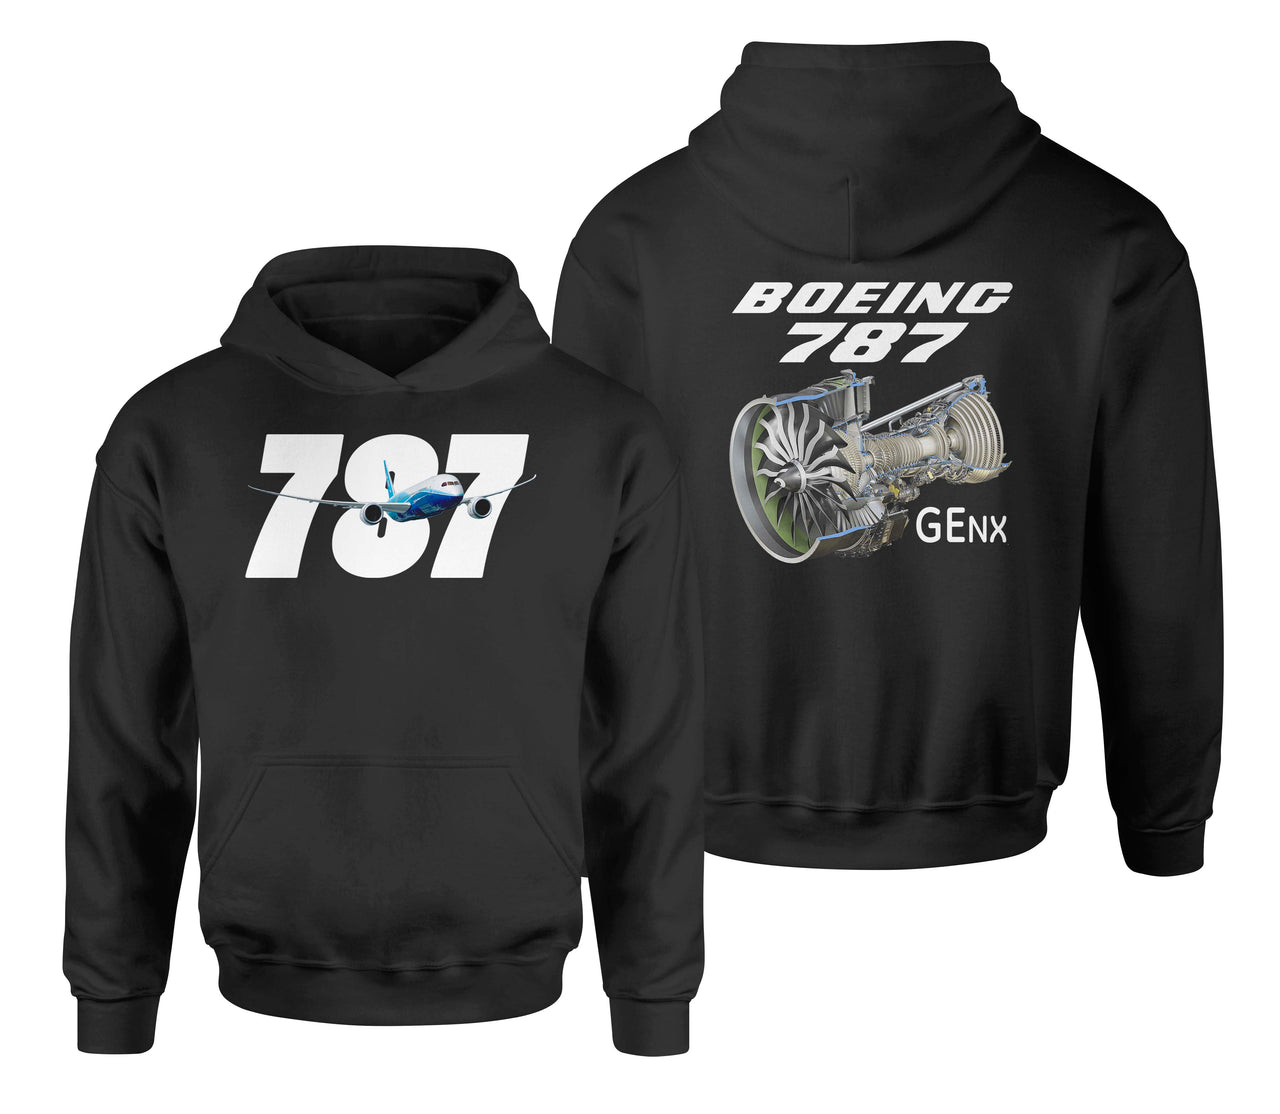 Boeing 787 & GENX Engine Designed Double Side Hoodies